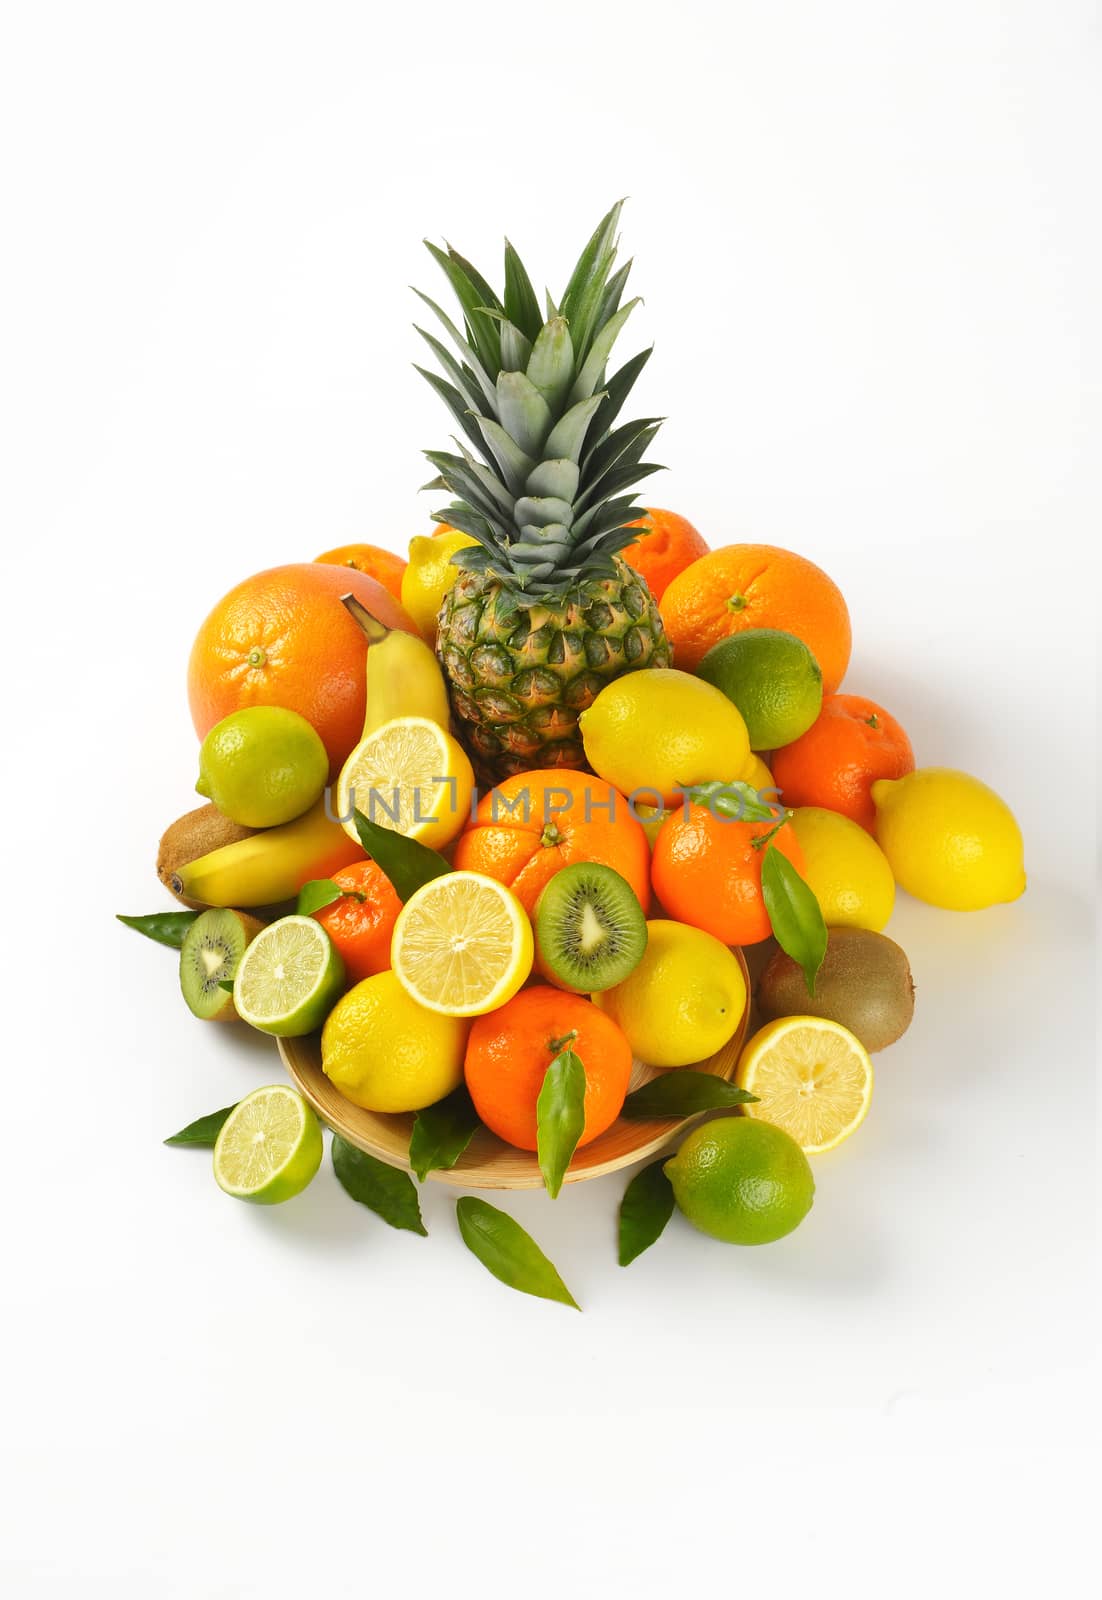 tropical fruit assortment by Digifoodstock